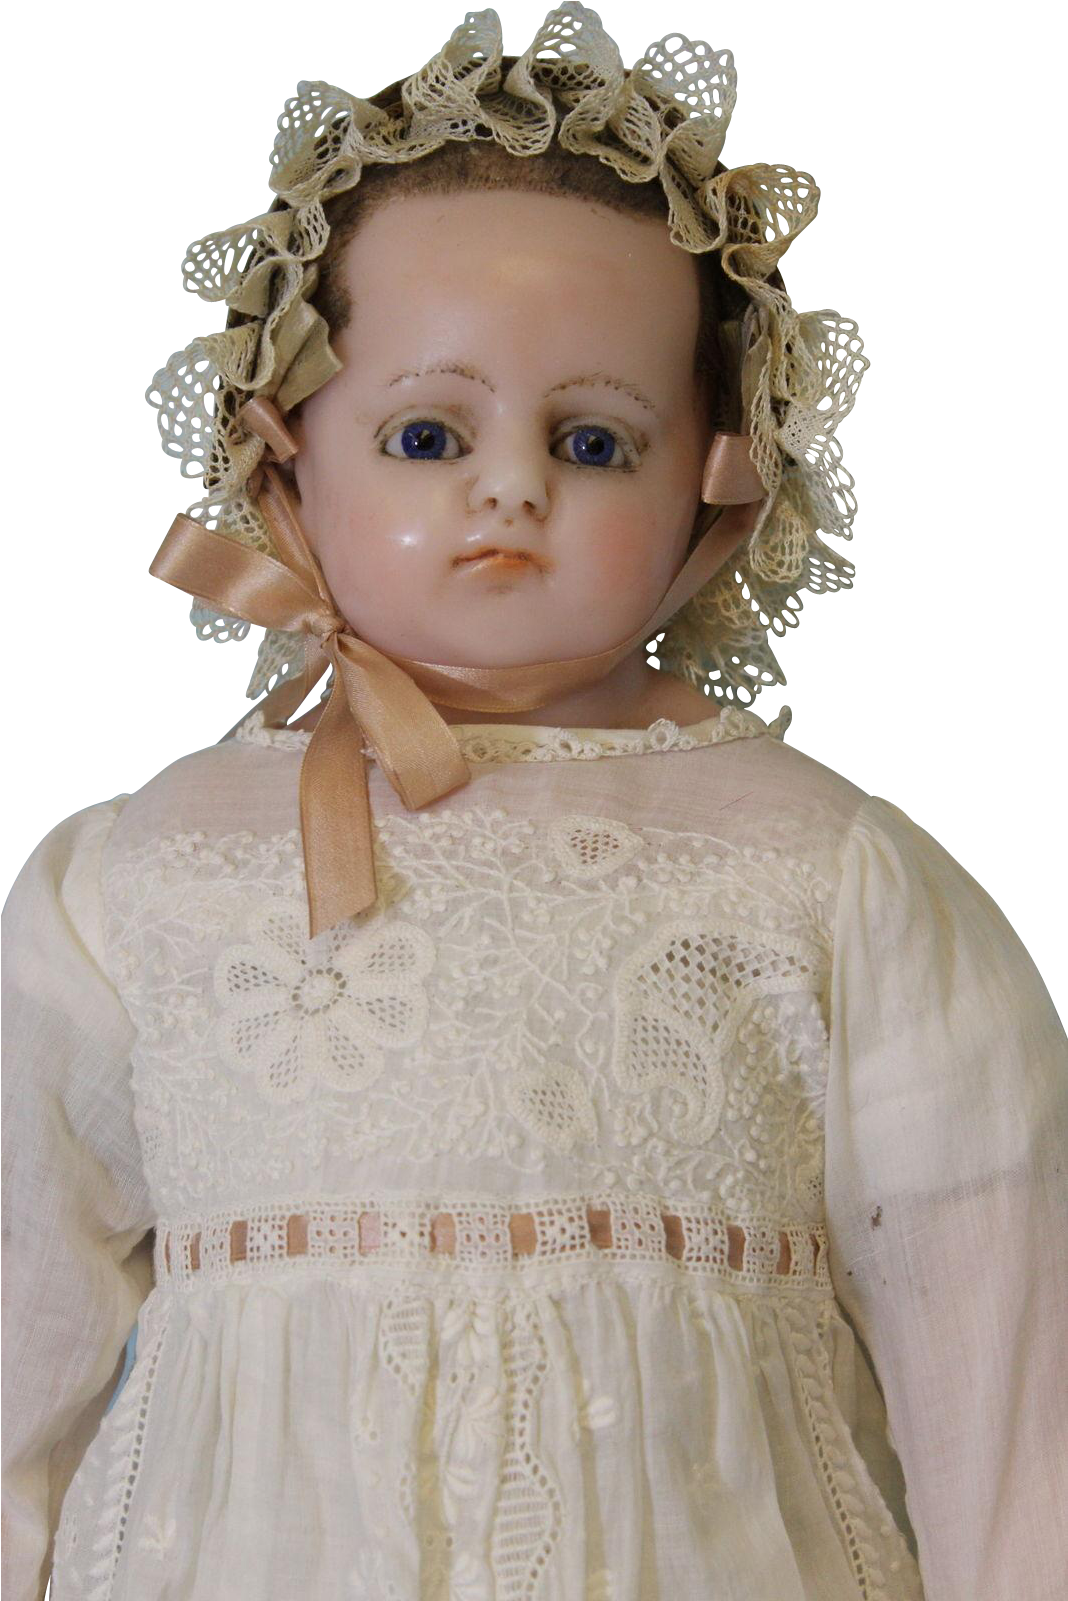 A Doll With A White Dress And Blue Eyes